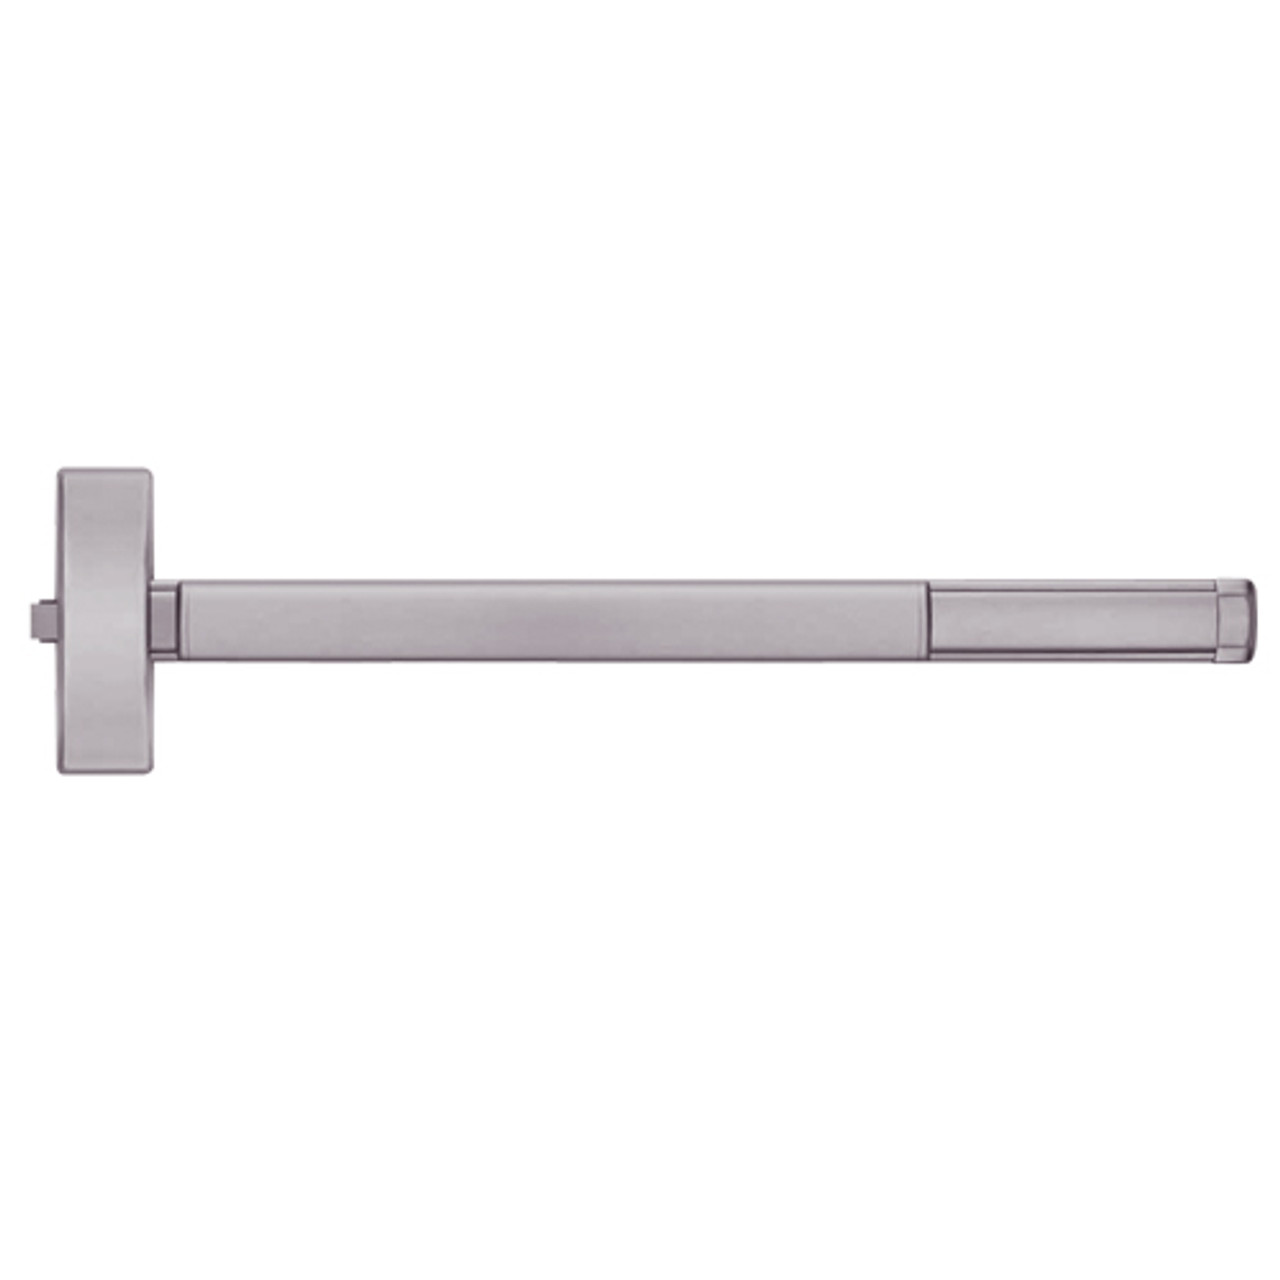 ELRFL2114-630-48 PHI 2100 Series Fire Rated Apex Rim Exit Device with Electric Latch Retraction Prepped for Lever-Knob Always Active in Satin Stainless Steel Finish